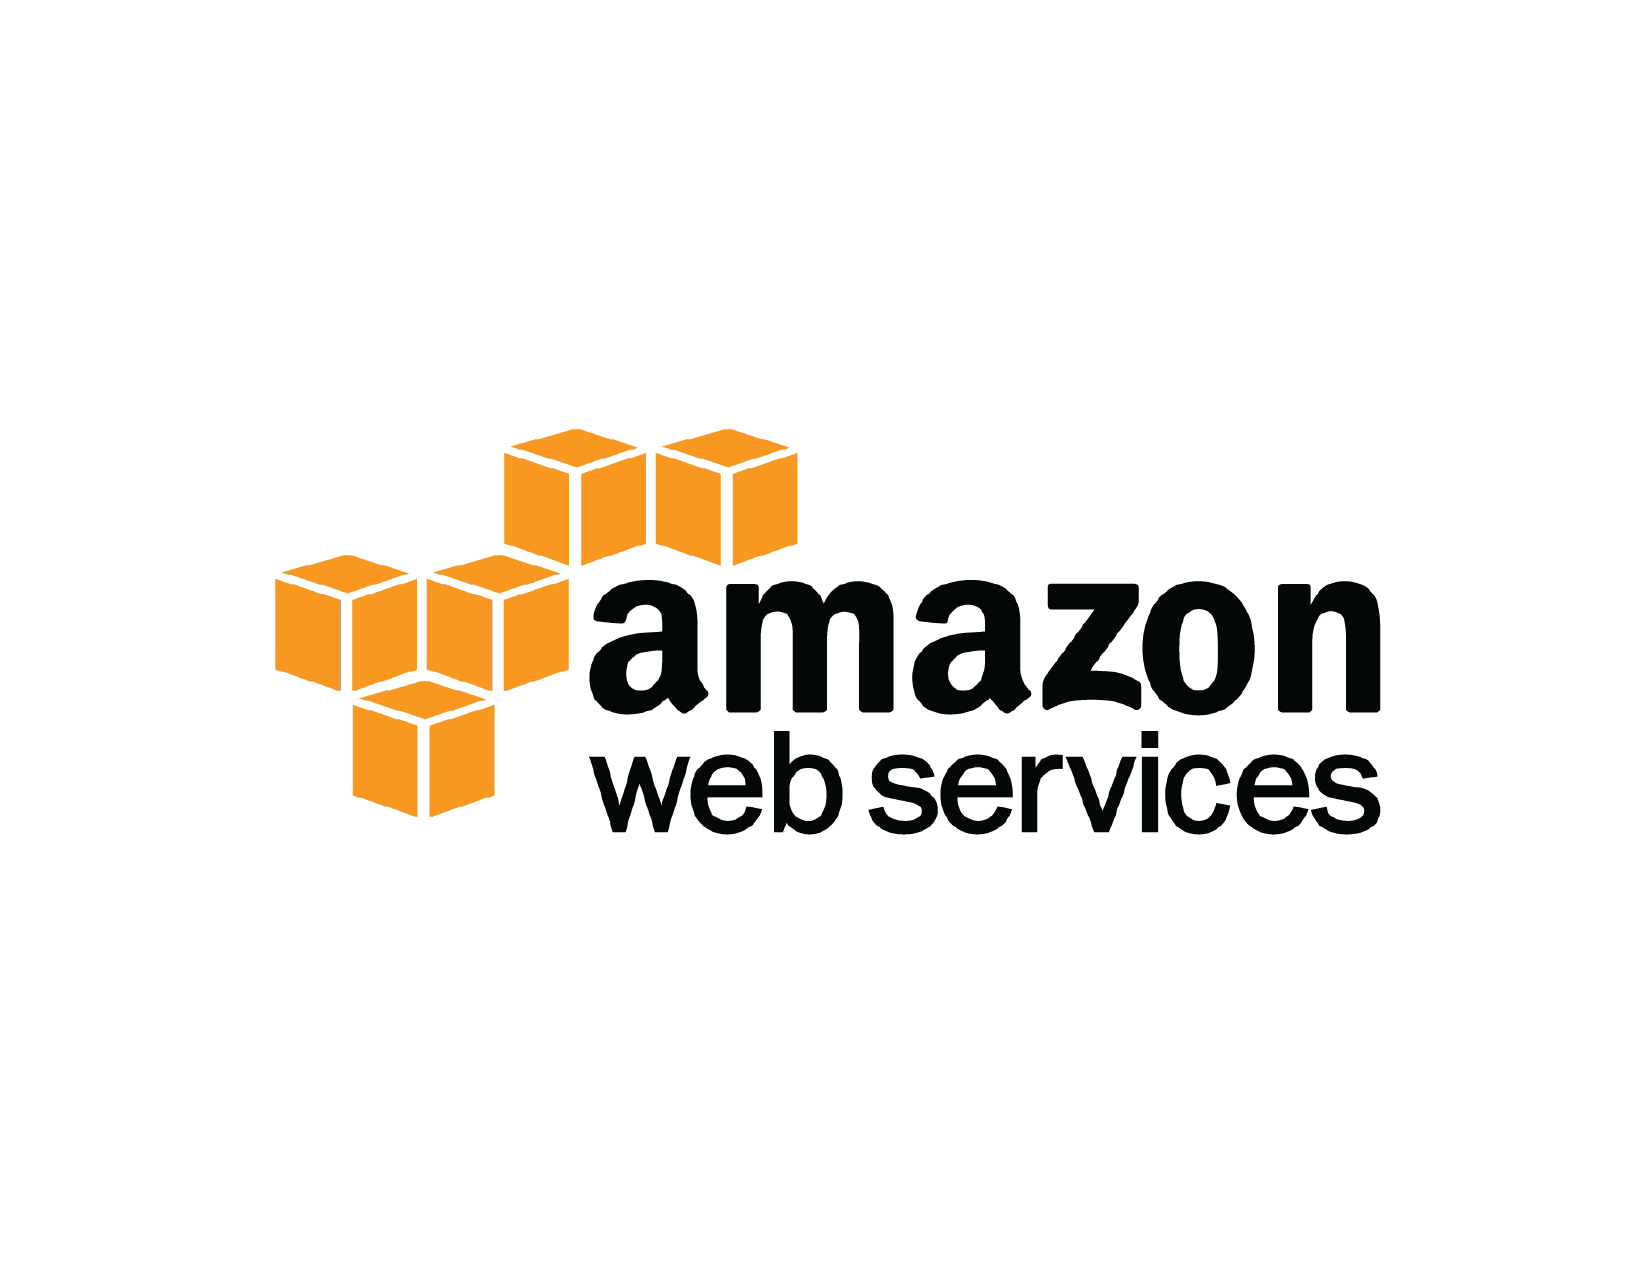 AWS VS ALIBABA CLOUD SERVICES IN 2021